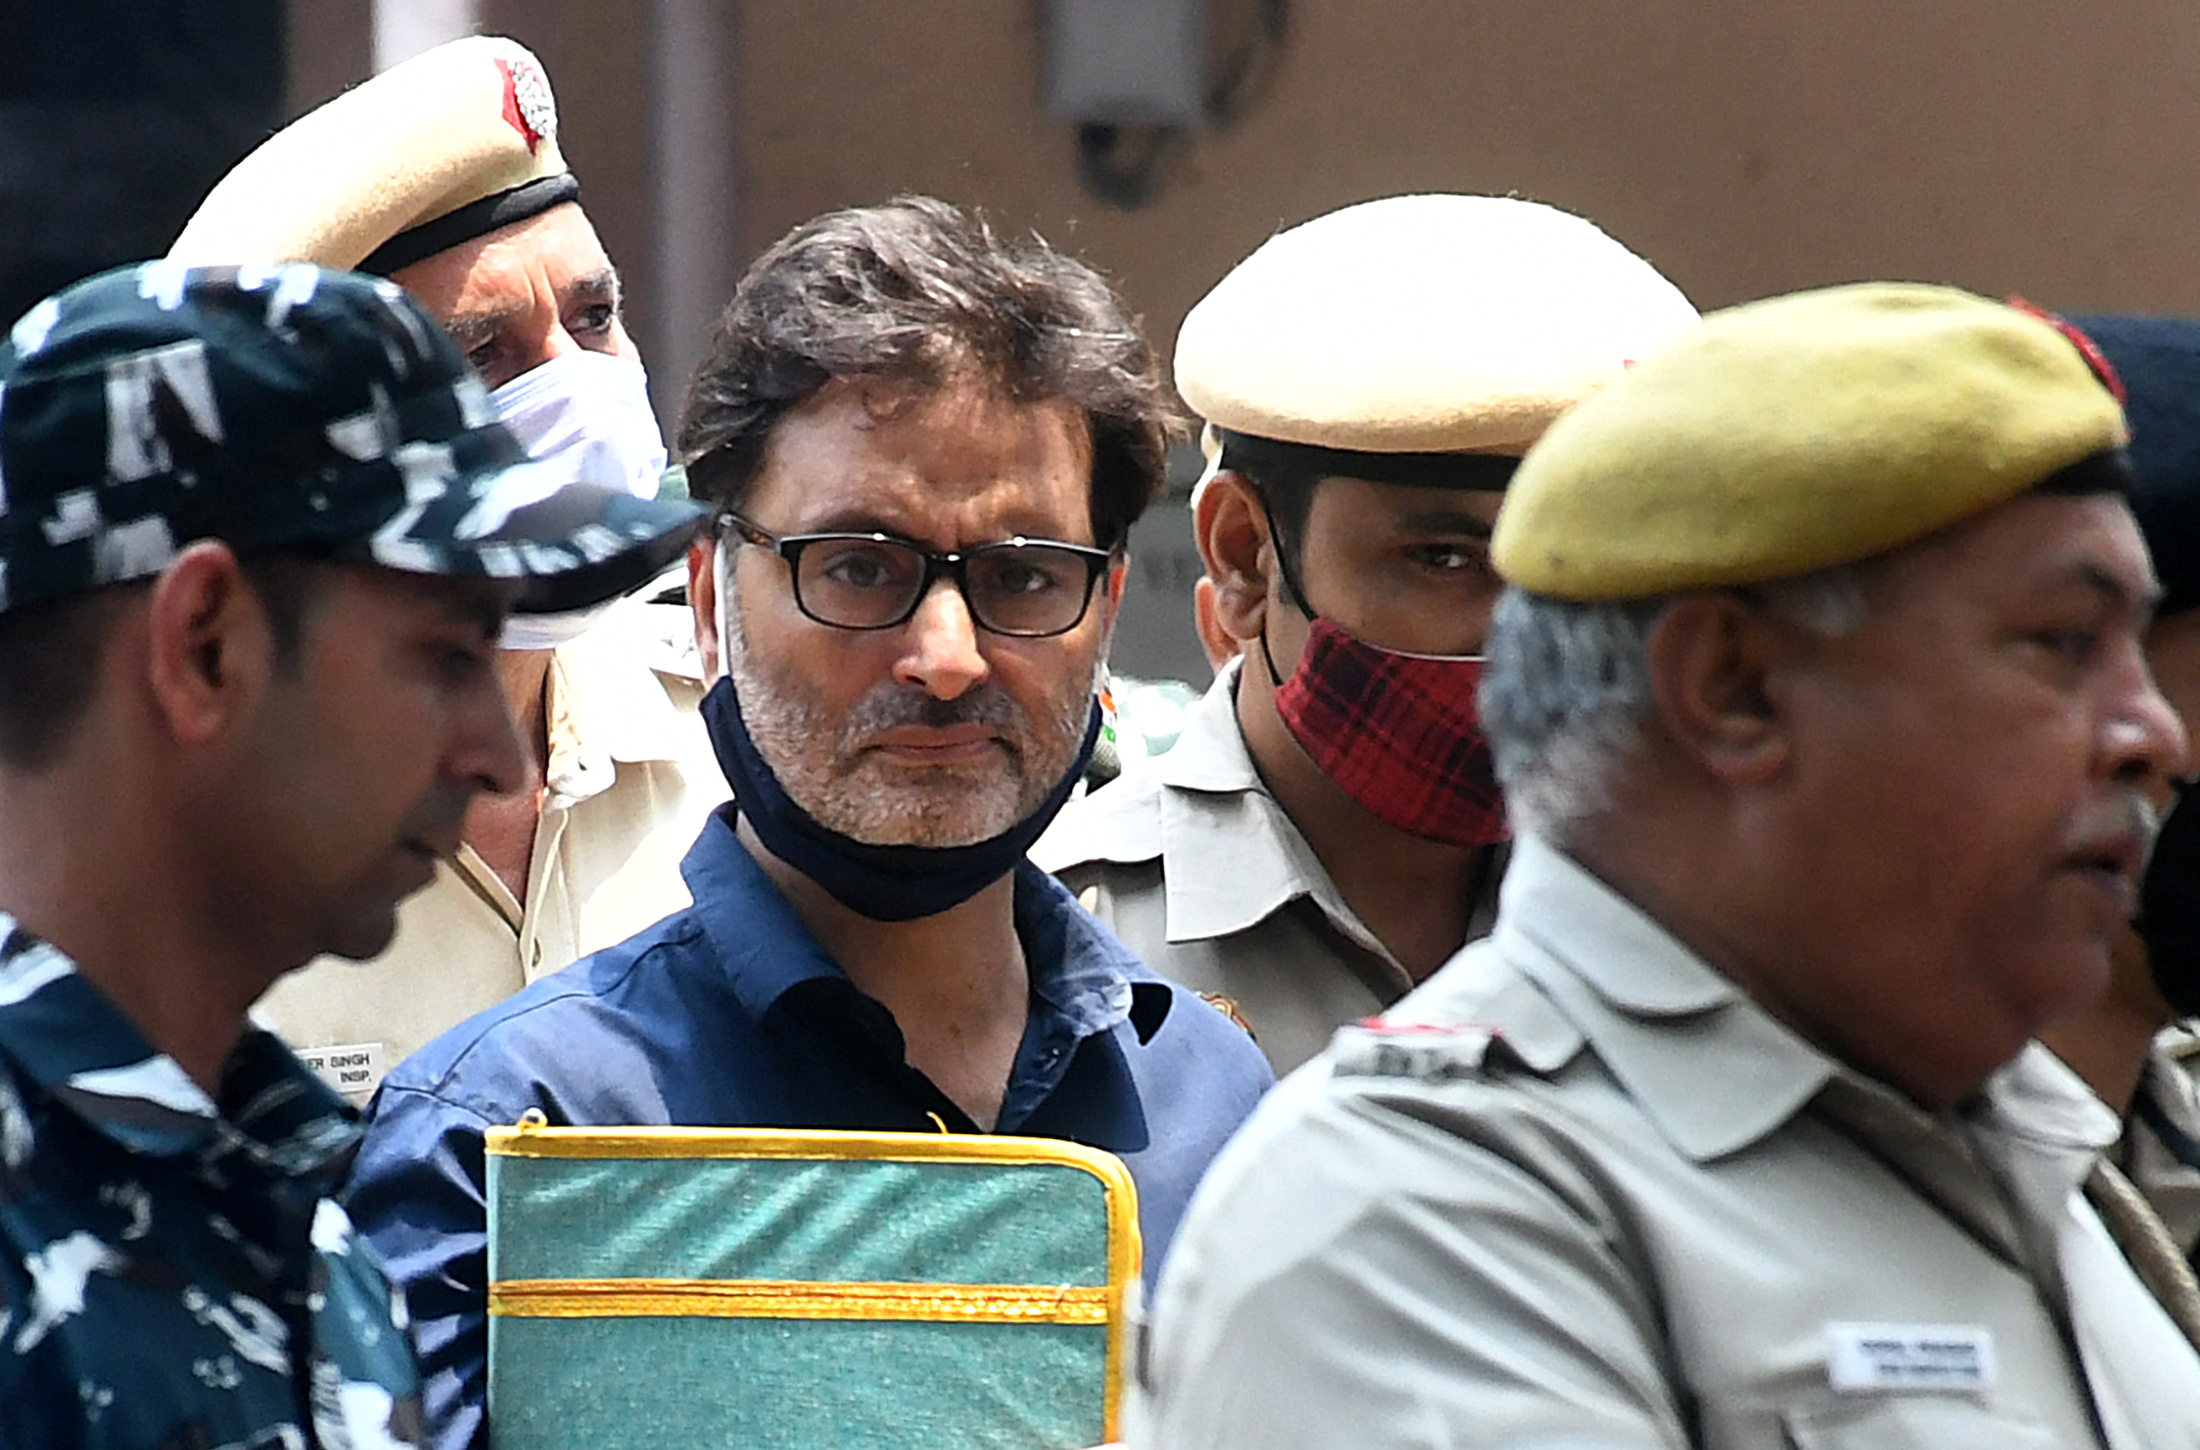 JKLF's Malik is escorted by Indian police officers at a court premises in New Delhi